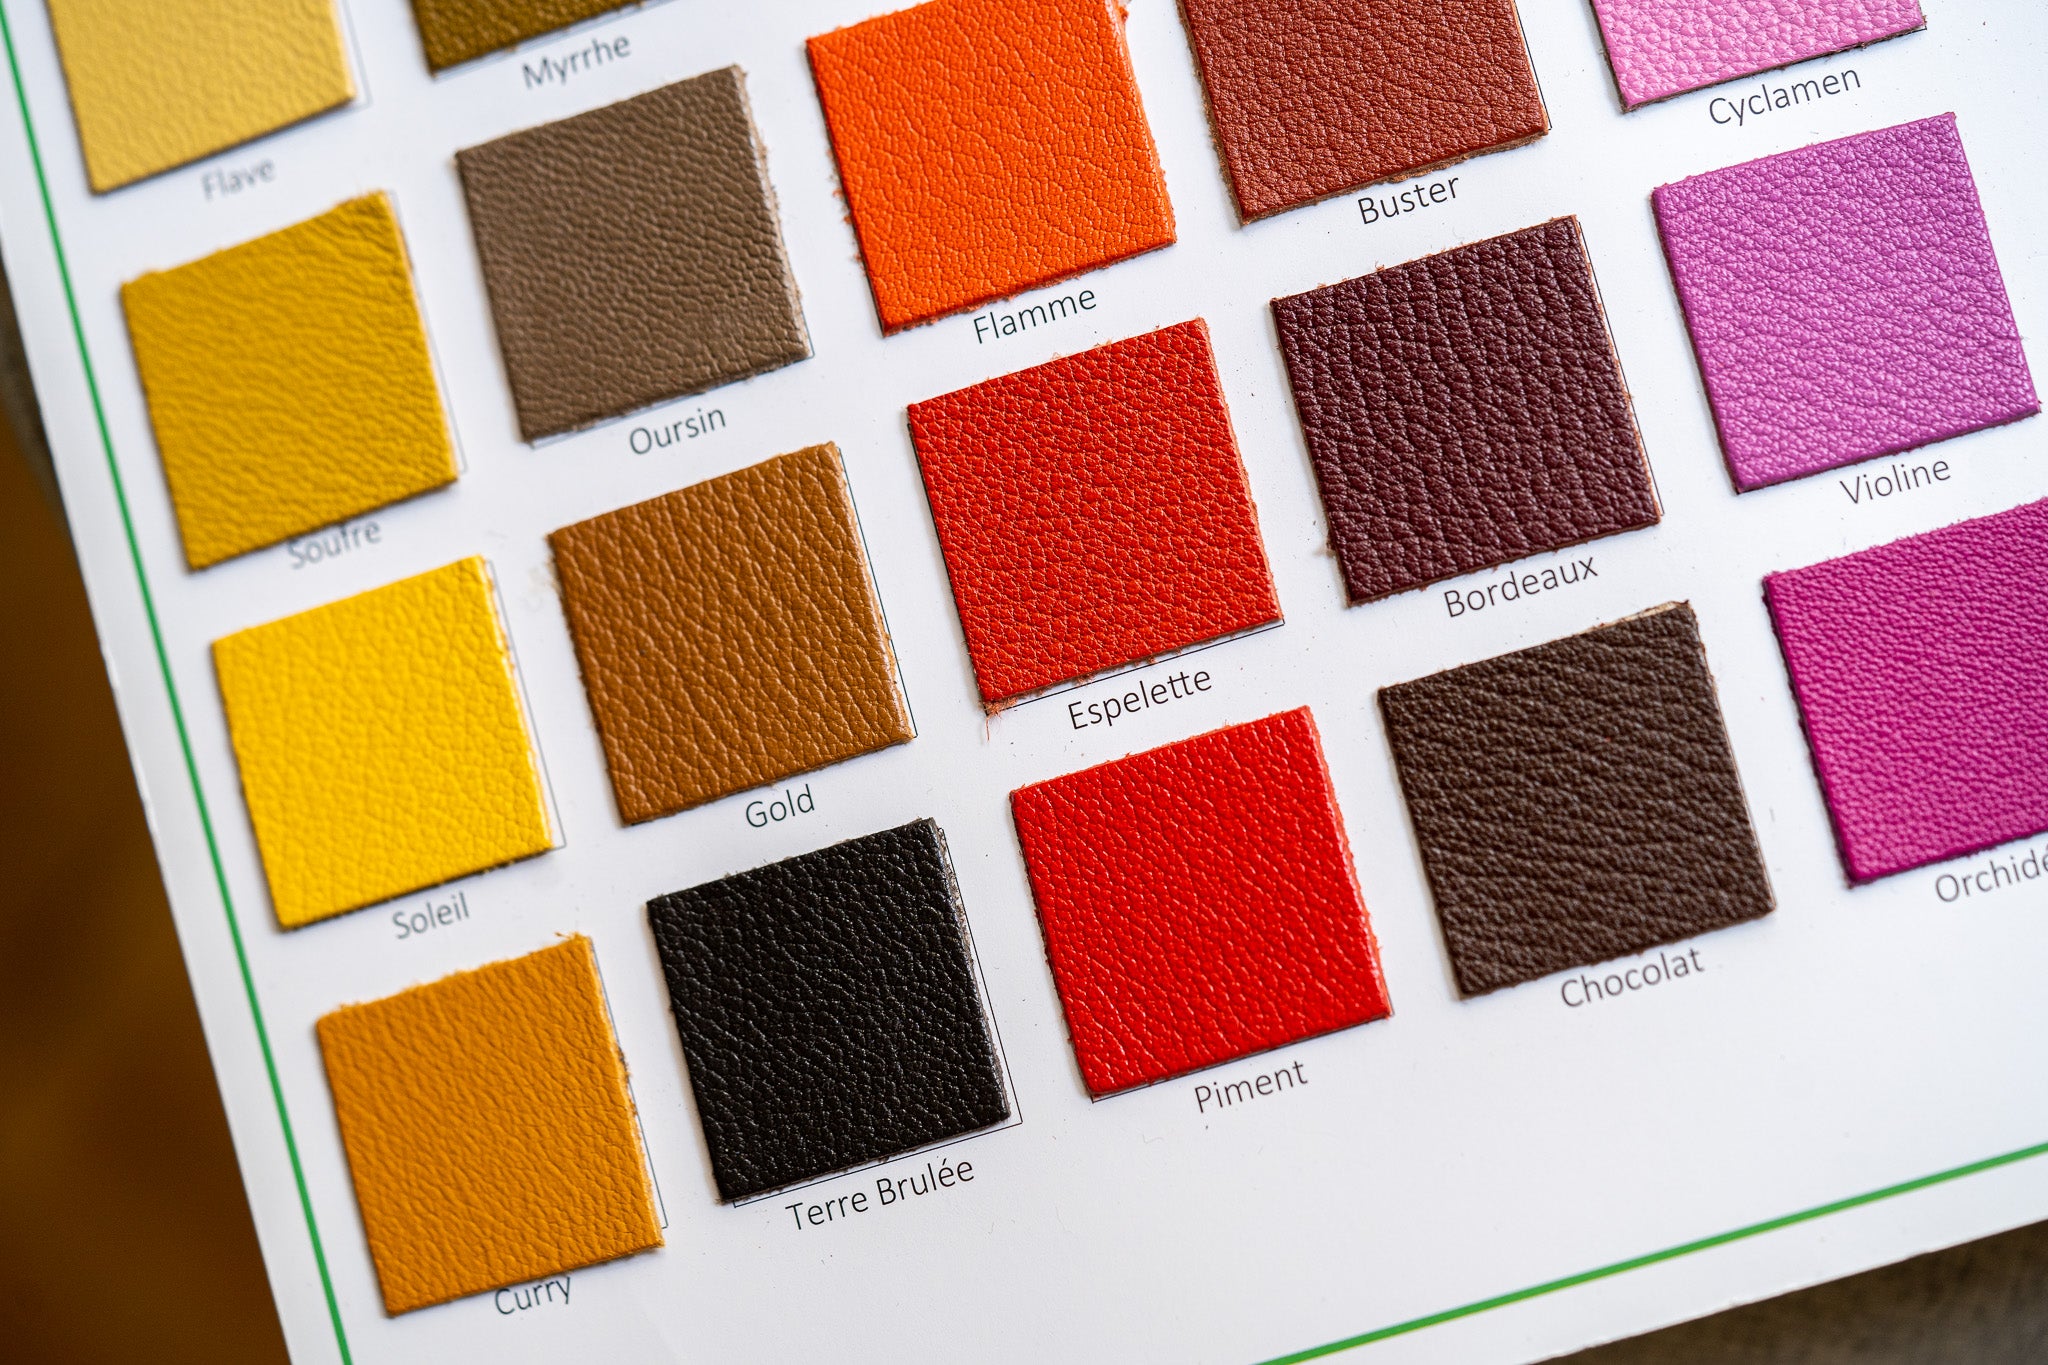 Goat Skin Leather used by Atelier Grinda to make custom luxury leather goods such as wallets and bags